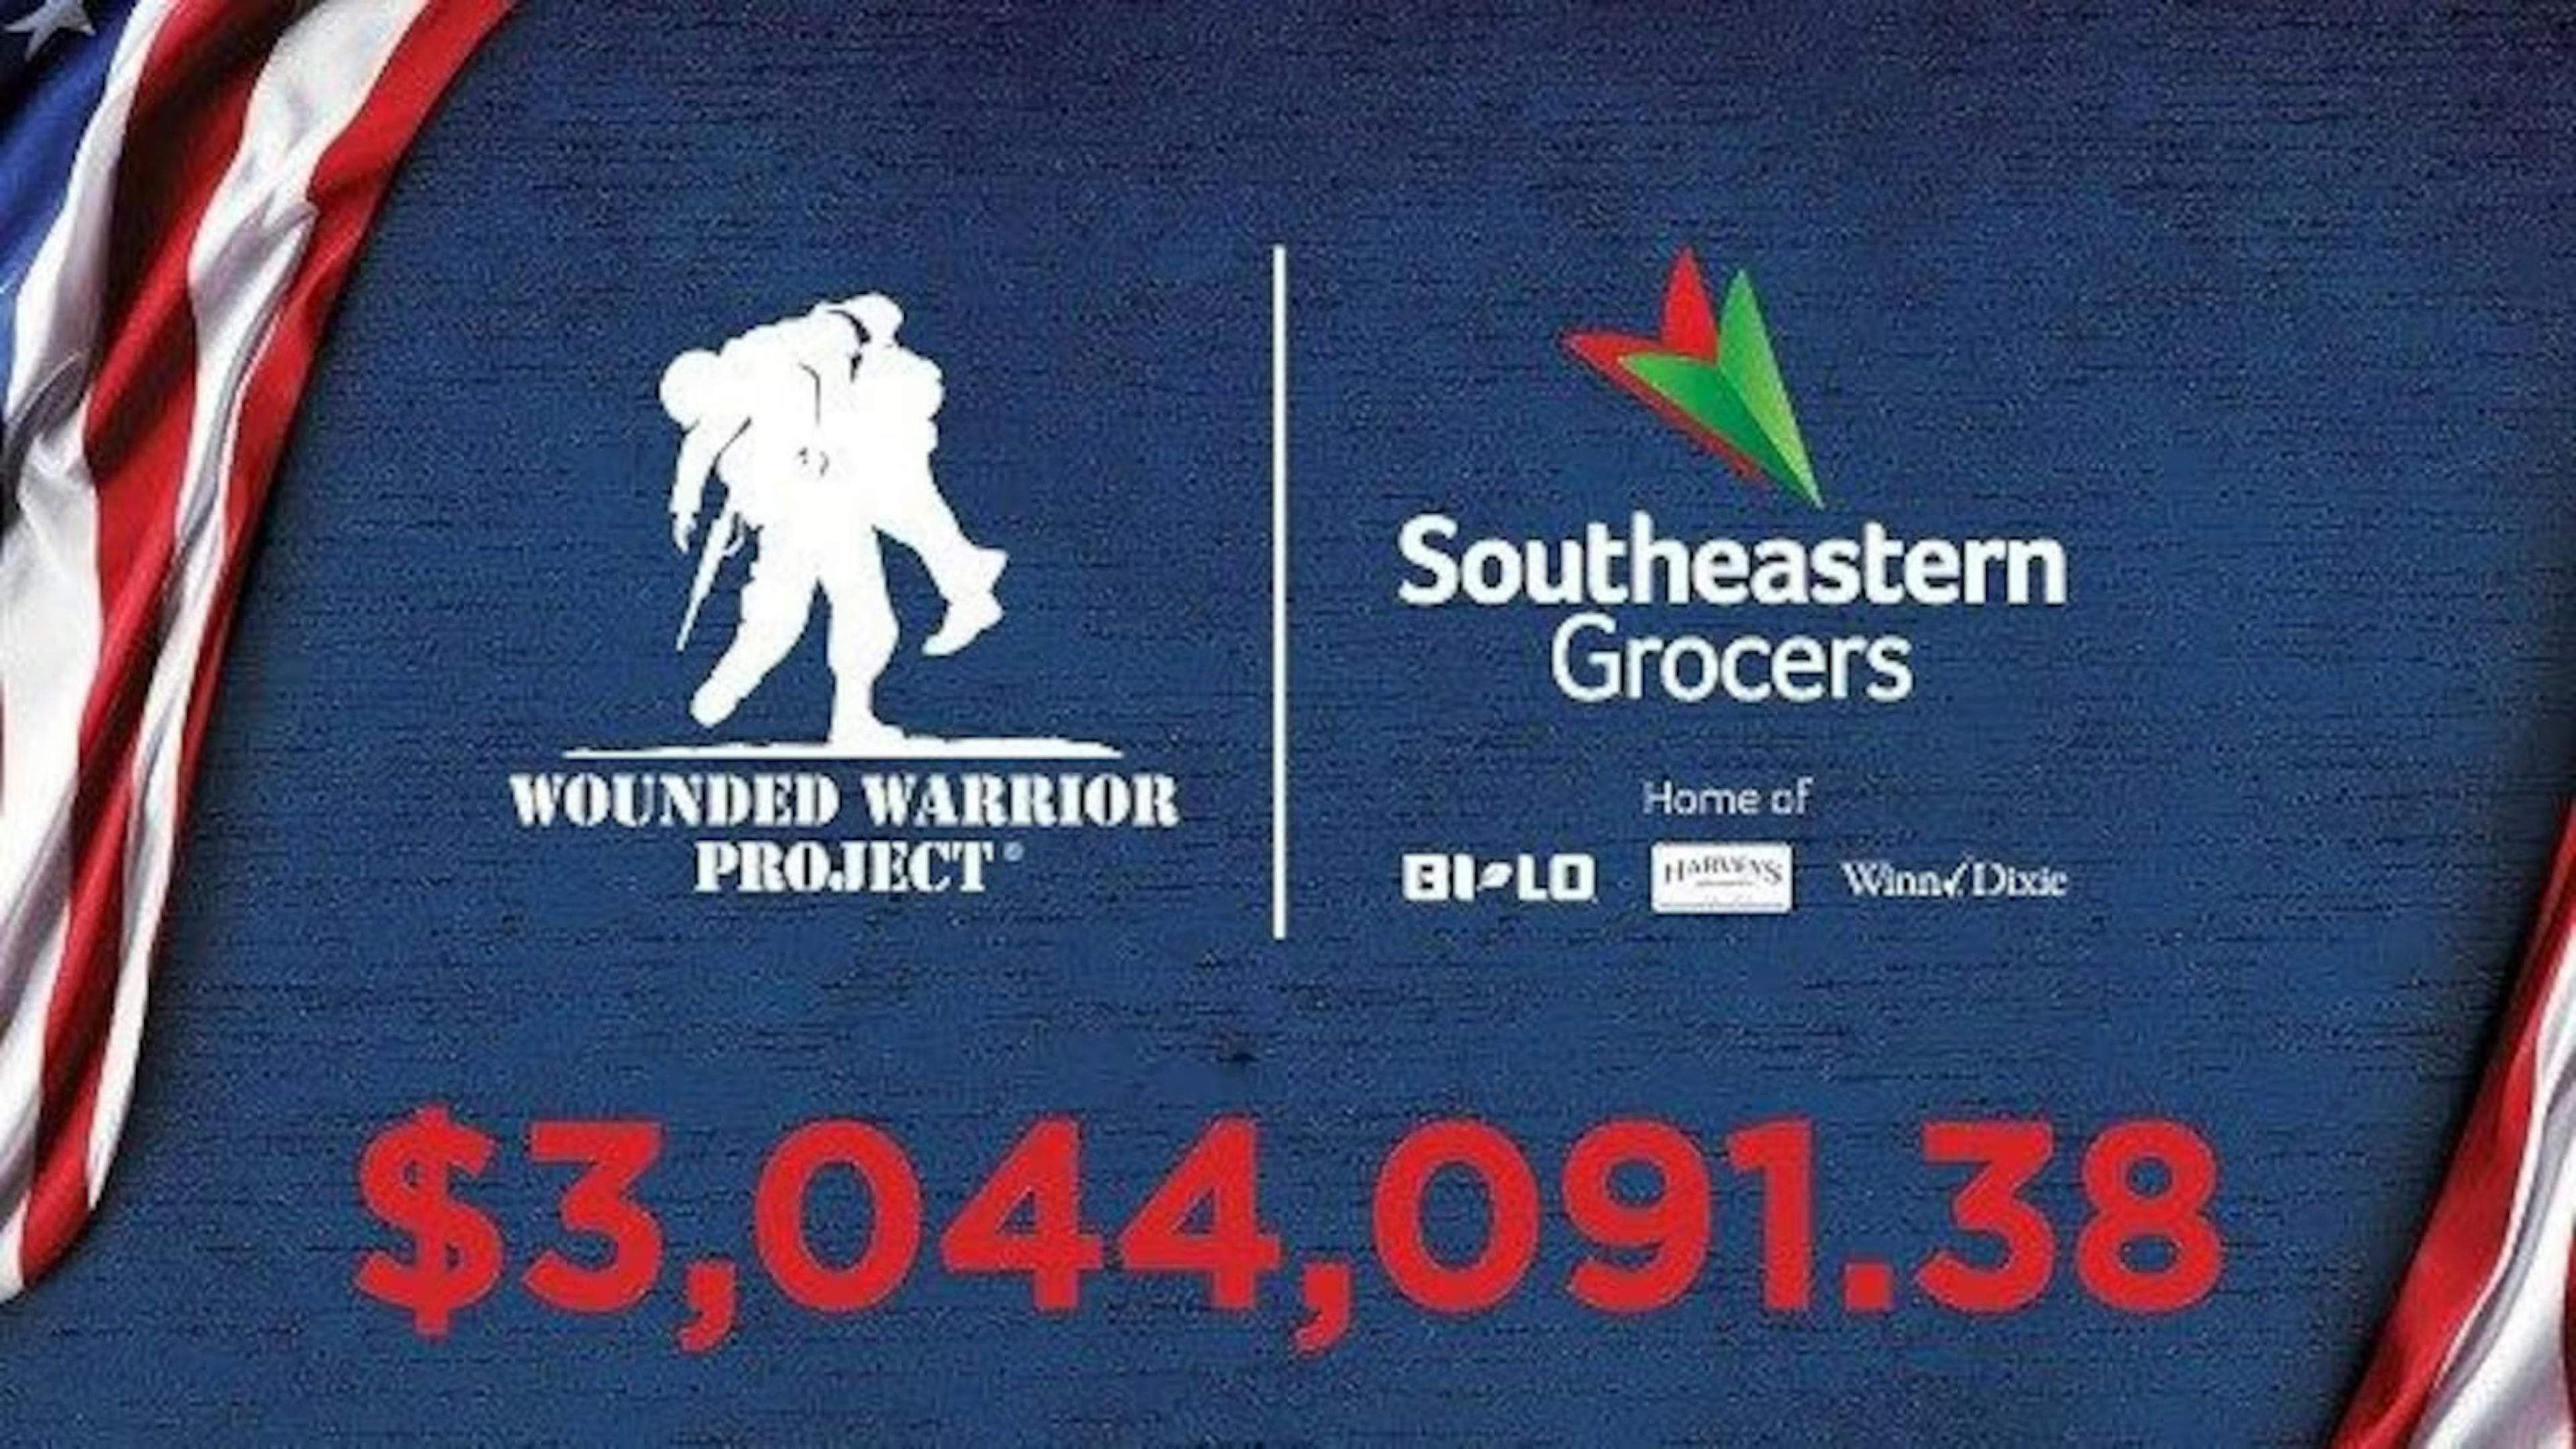 Wounded Warrior fundraising report